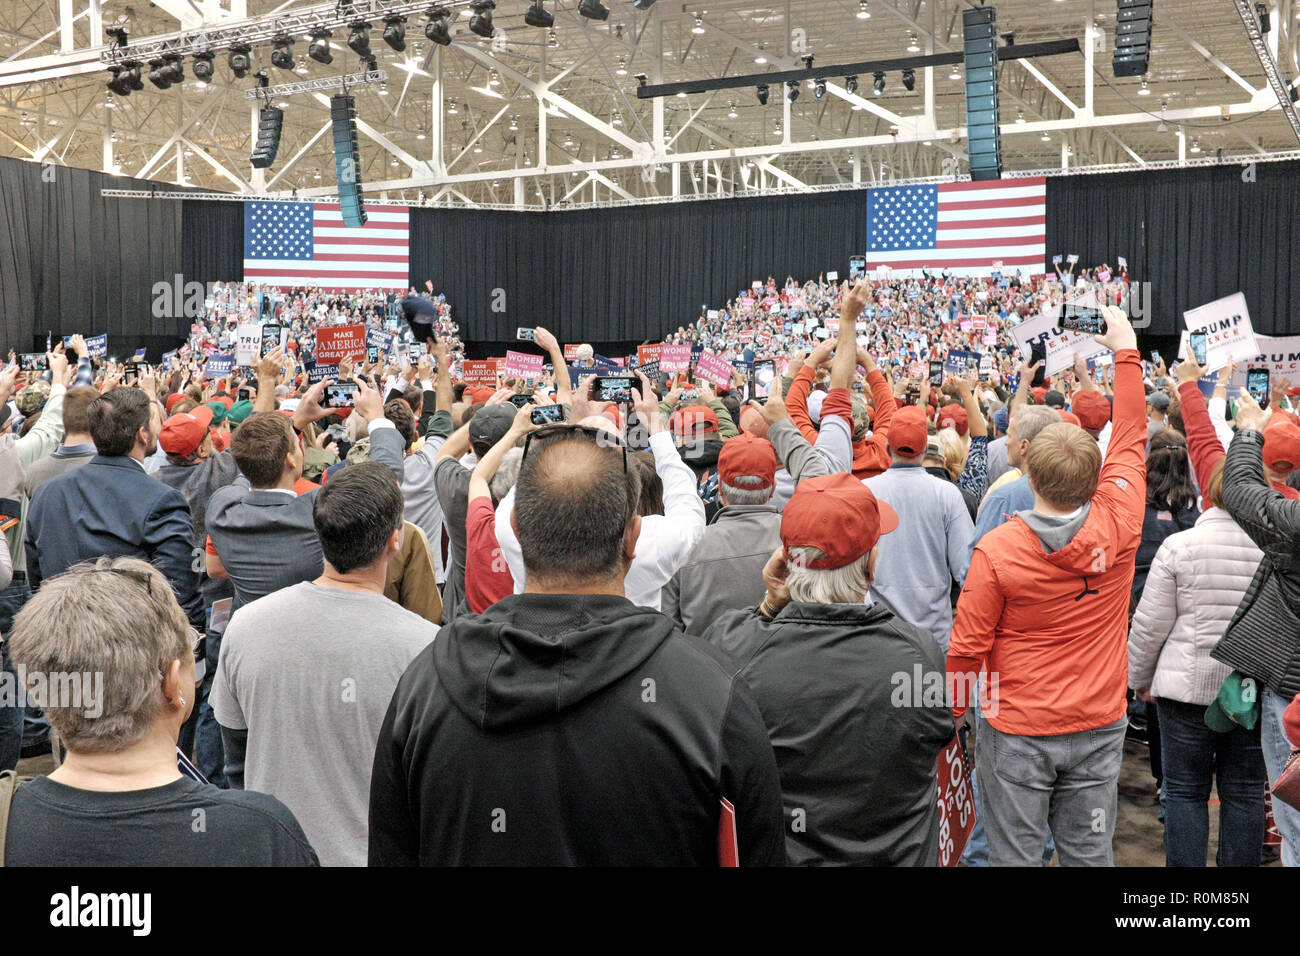 Cleveland, Ohio, USA, 5th Nov, 2018.  Trump supporters rally together during his appearance at the Cleveland International Exposition Center during his final day of energizing Republicans for the November 6, 2018 Midterm Elections.  Cleveland was the first of three final stops of a country-wide effort to get Republican voters to the polls.  Credit: Mark Kanning/Alamy Live News. Stock Photo